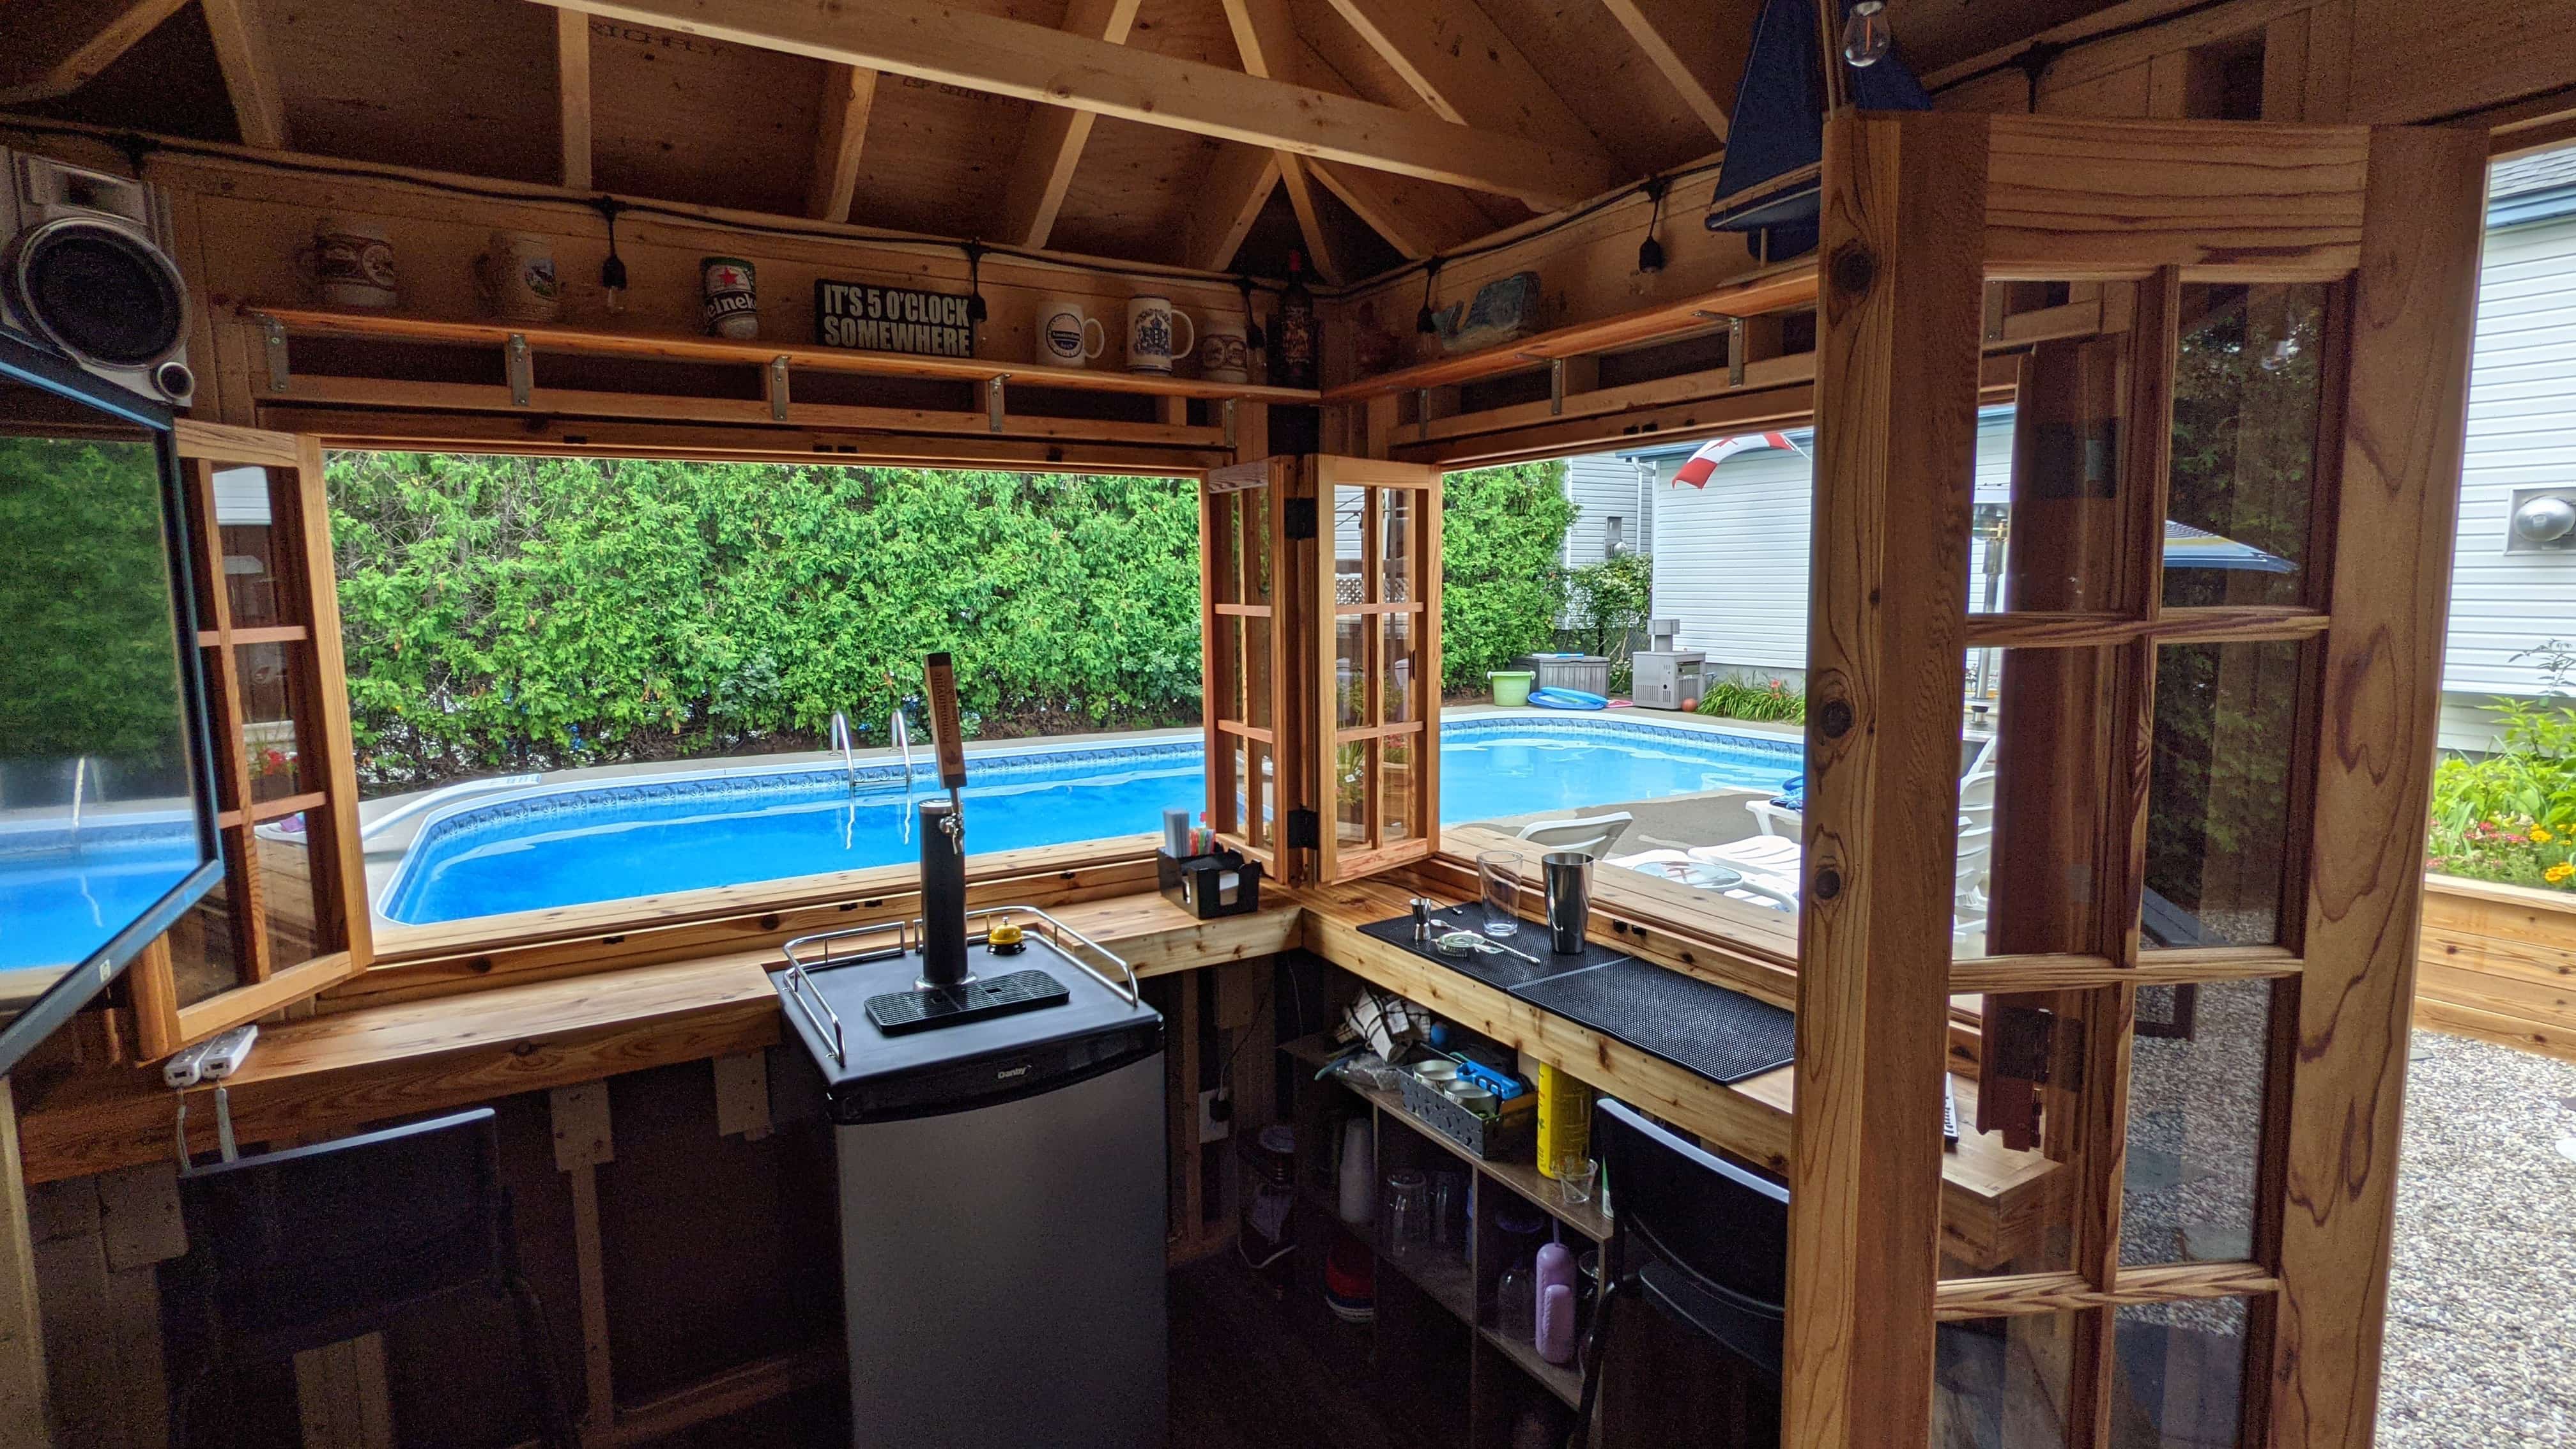 Interior view of 8' x 12' Sonoma Pool Cabana located in Stittsville, Ontario – Summerwood Products